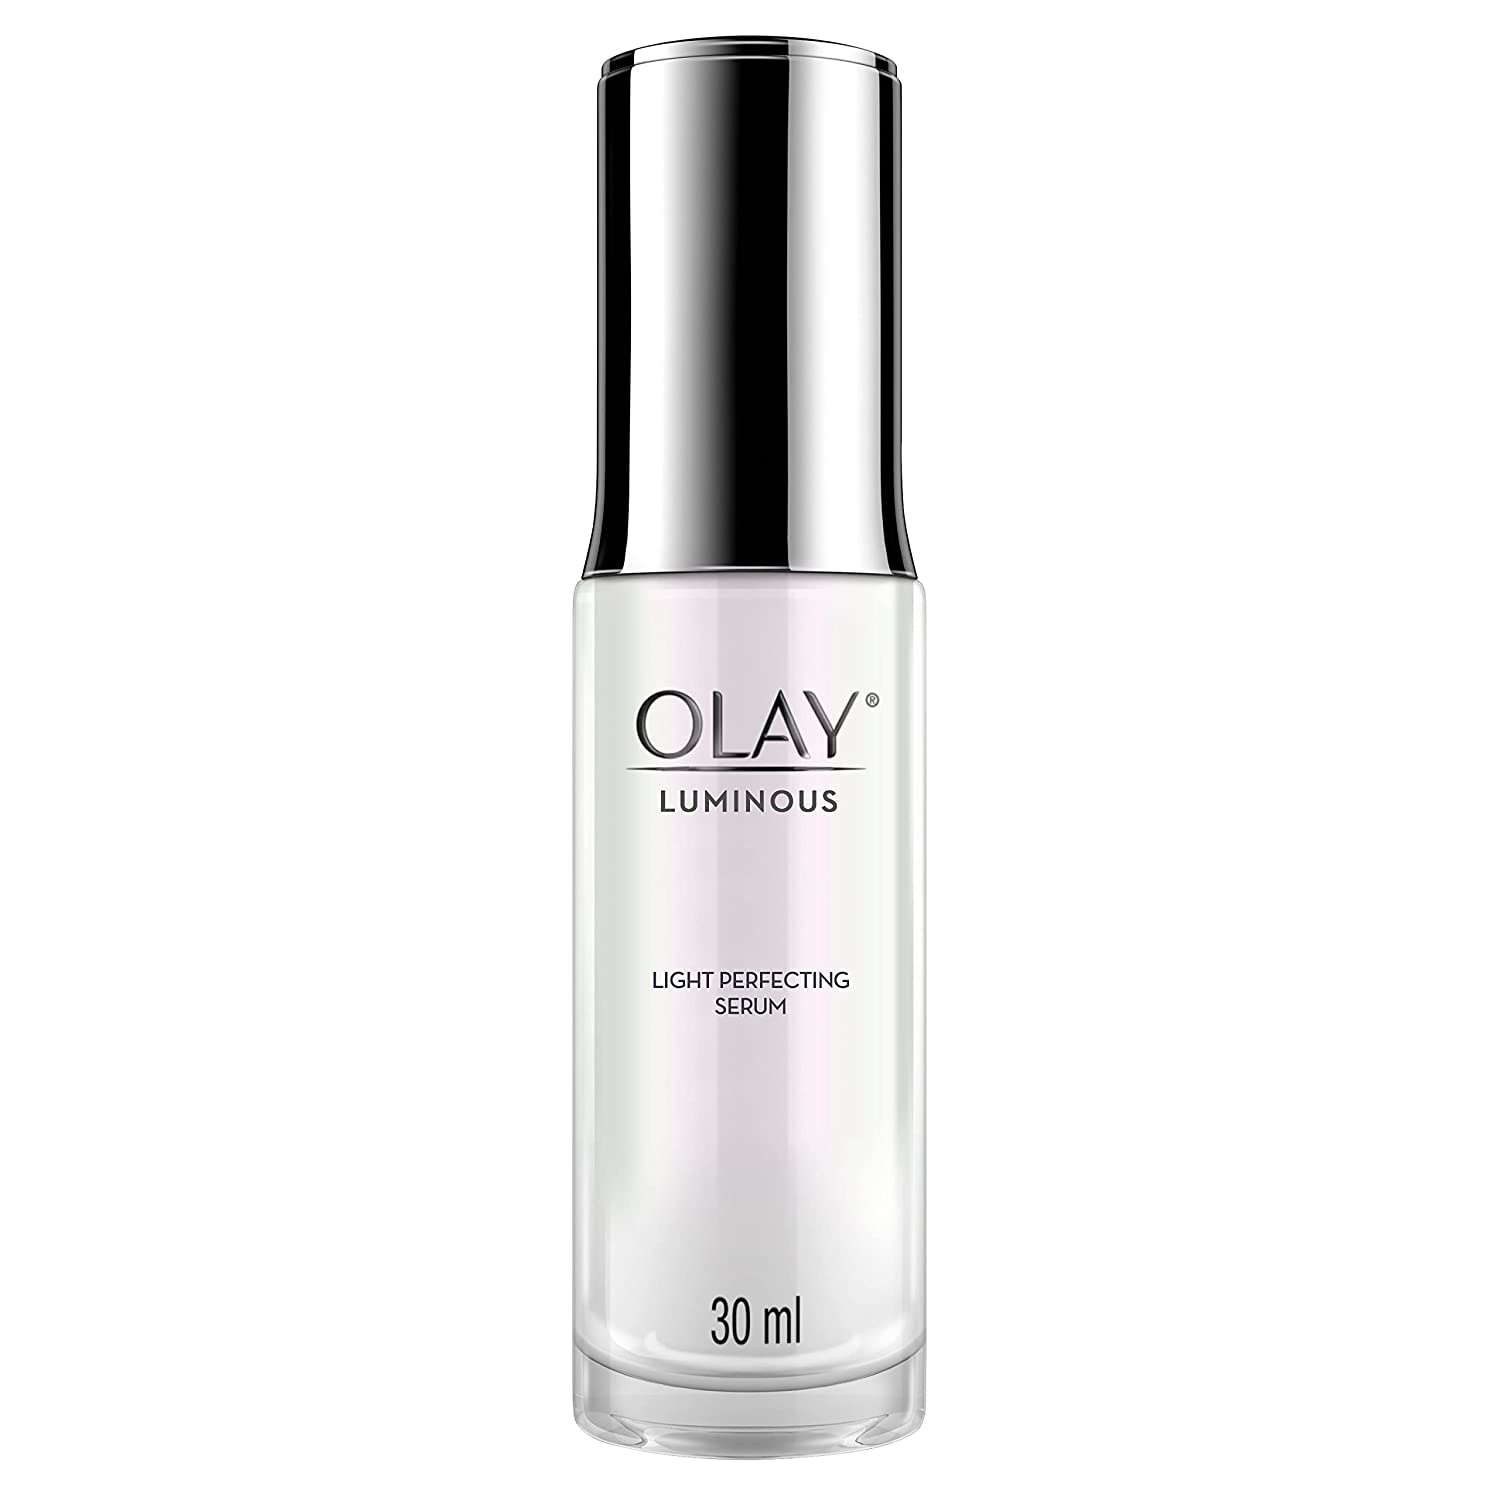 Olay Luminous Light Perfecting Serum, Suitable for Normal, Dry, Oily & Combination skin - 30ml